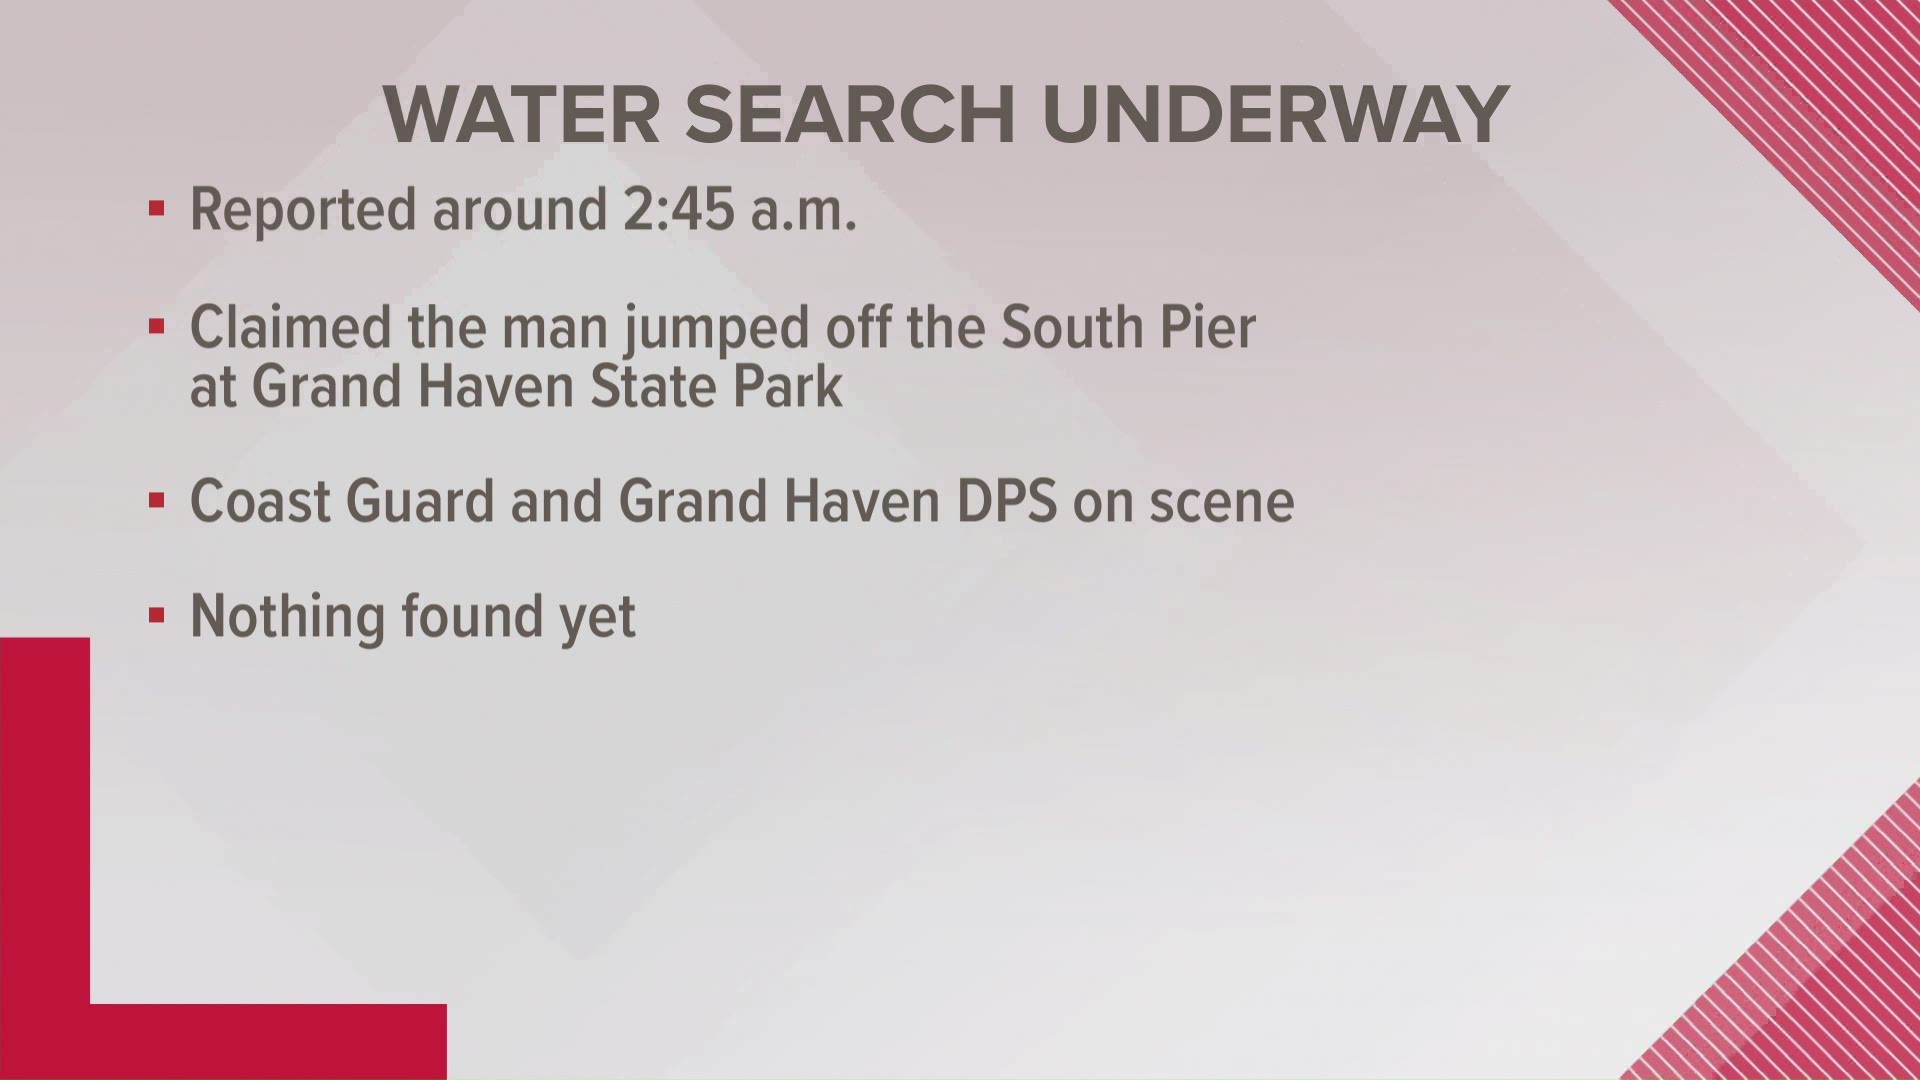 The U.S. Coast Guard and the Grand Haven Department of Public Safety are currently on the lake searching for the man.